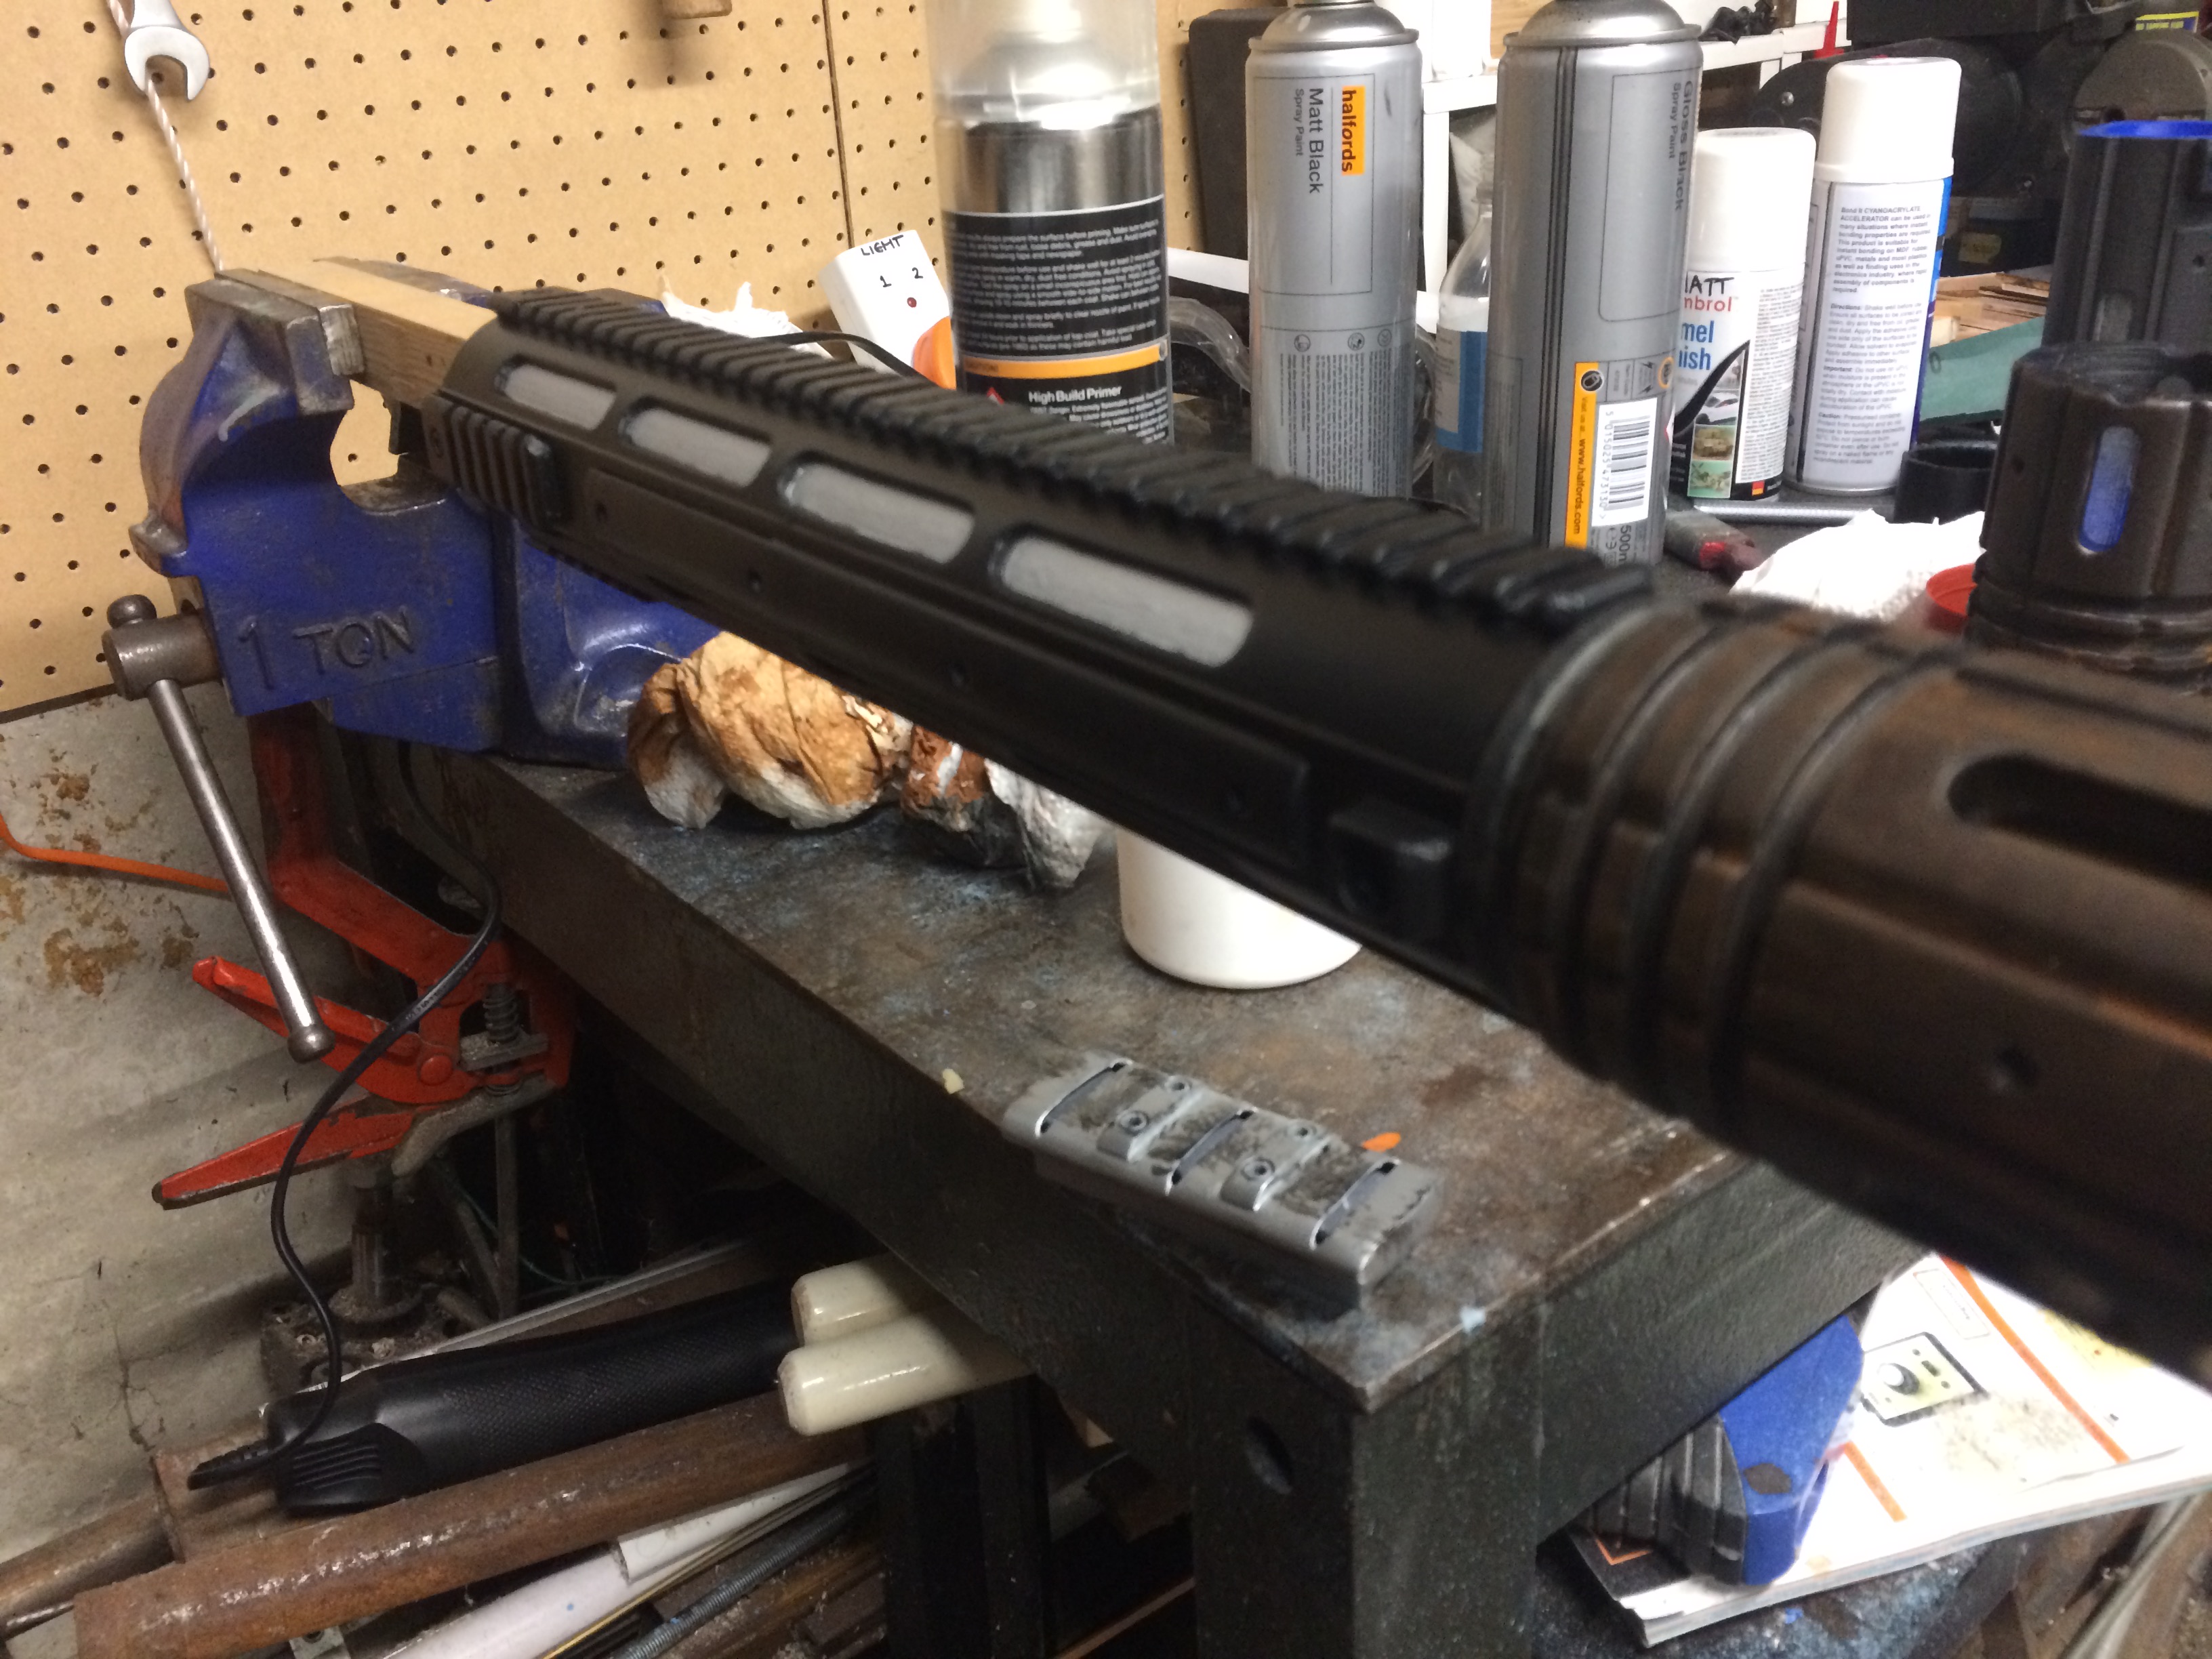 How to make replica of the 'Blunderbuss' from the movie Looper - Quora